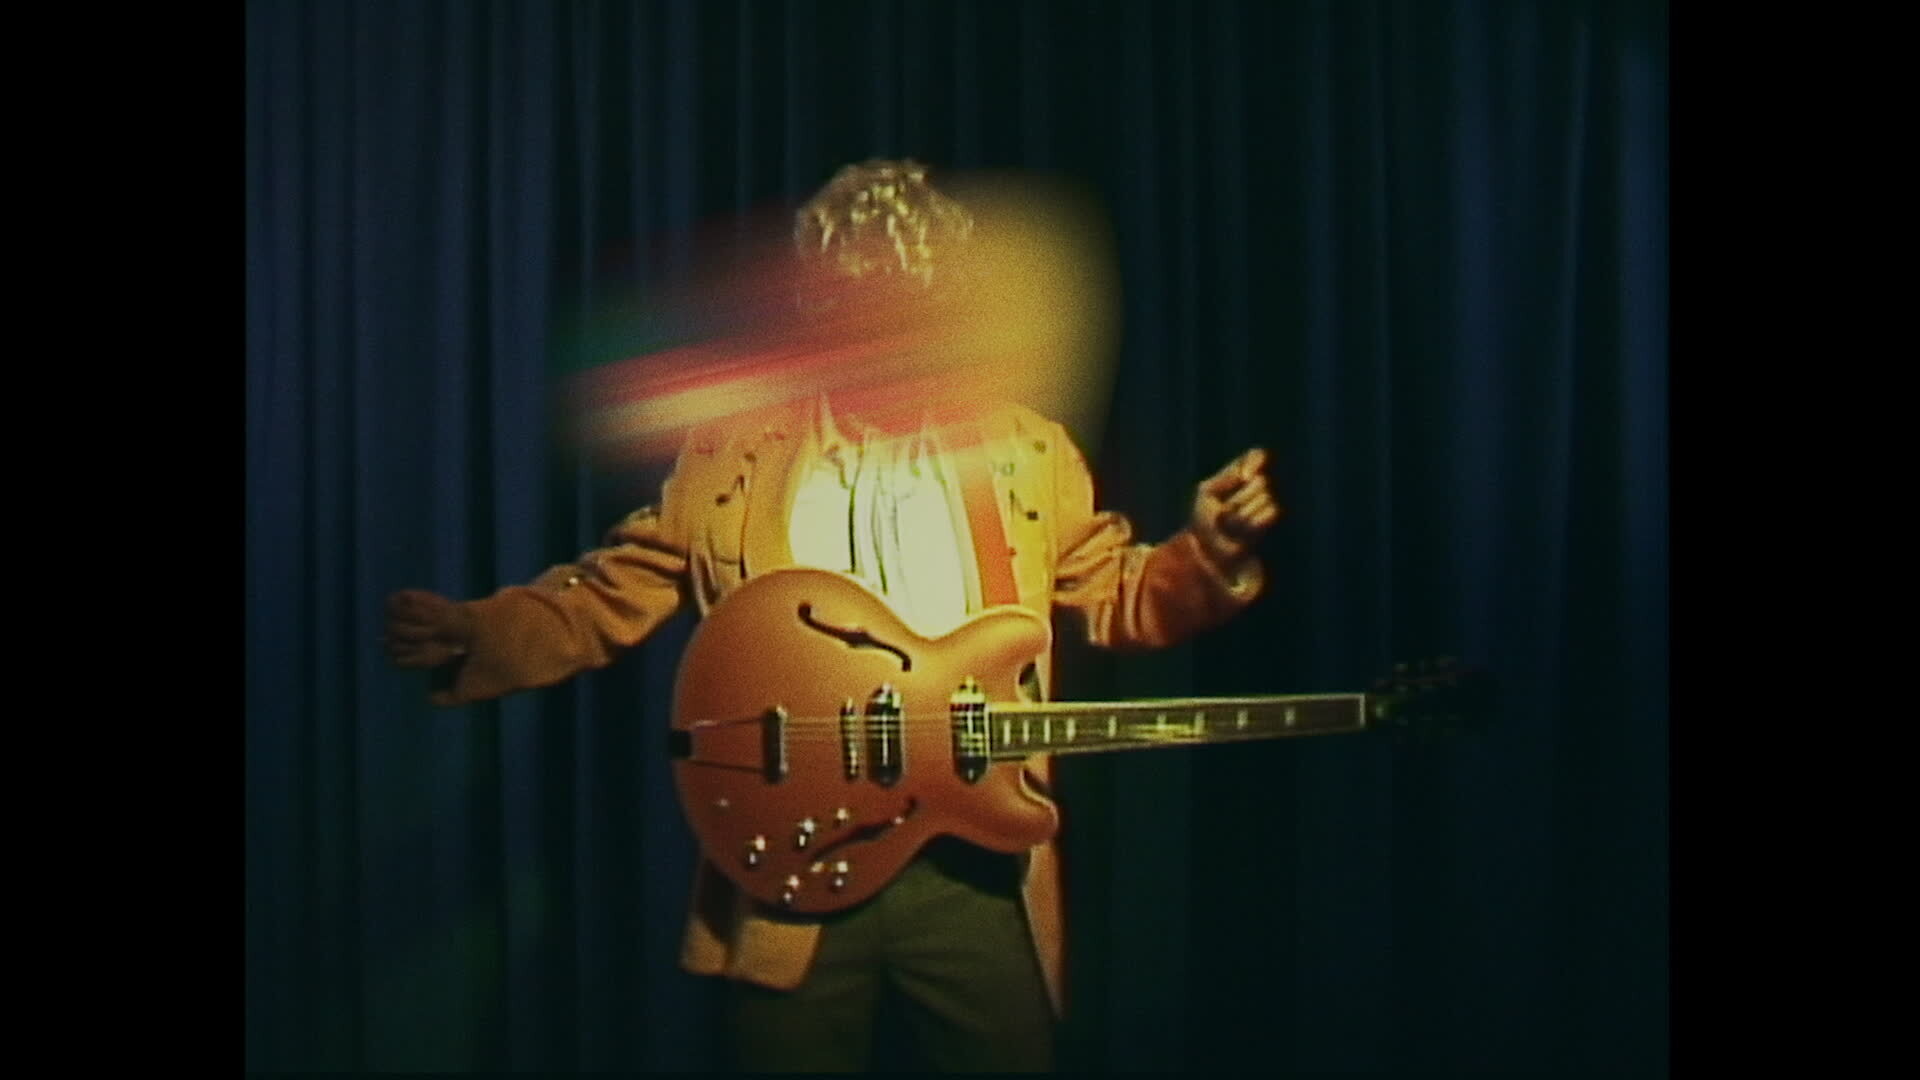 LORD HURON RELEASES OFFICIAL MUSIC VIDEO FOR “LOVE ME LIKE YOU USED TO”